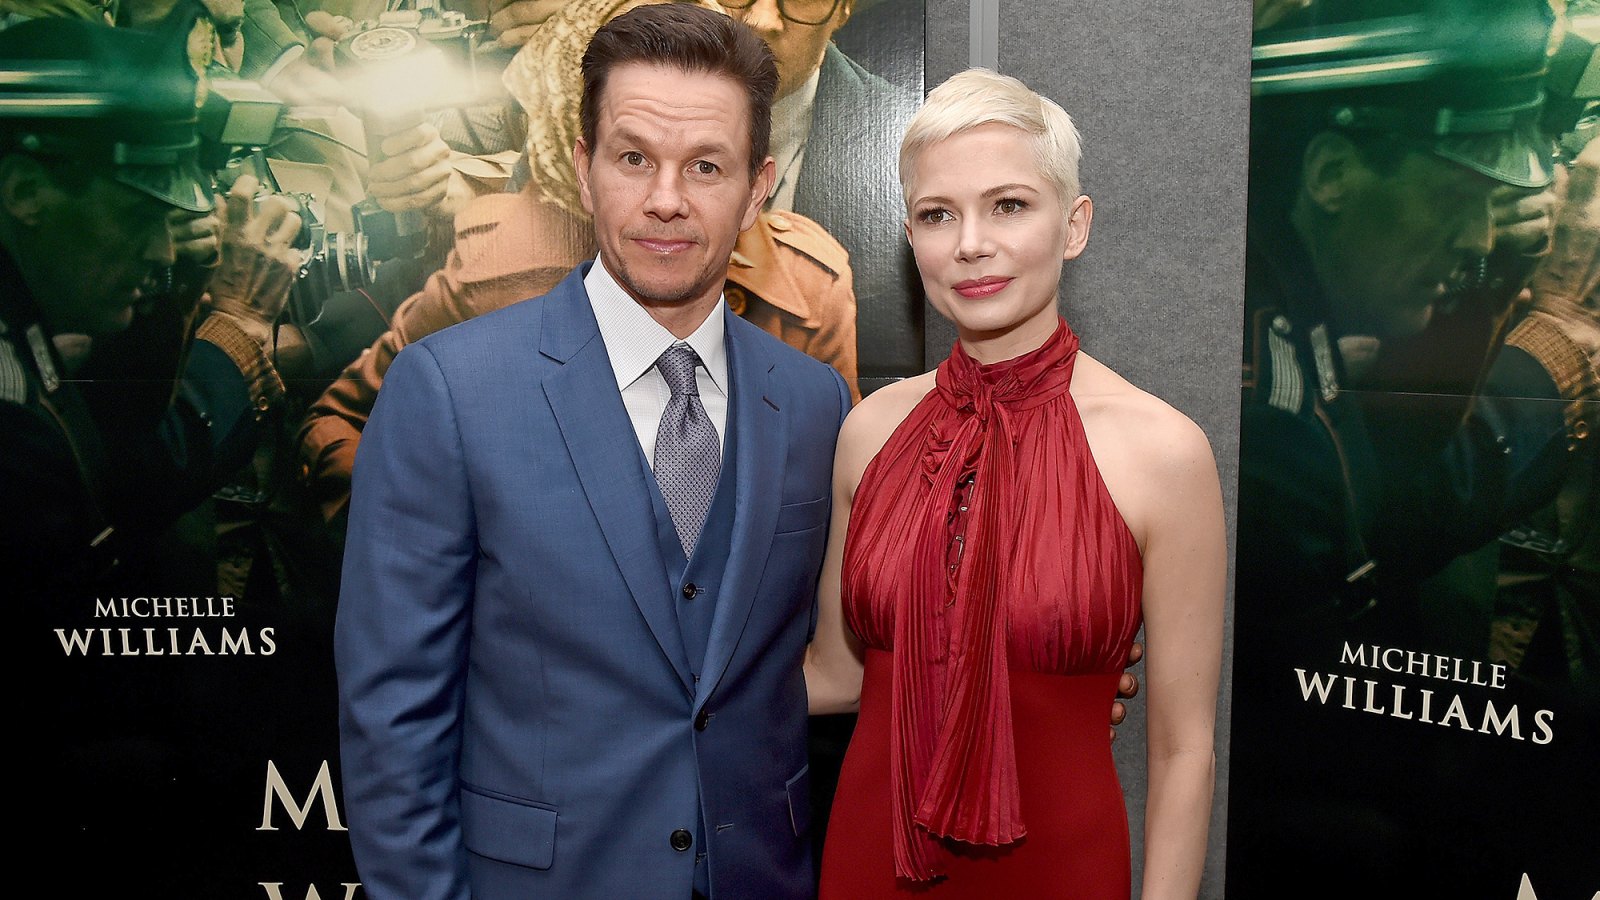 Mark Wahlberg, Michelle Williams, Time's Up, All the Money in the World, Reshoot